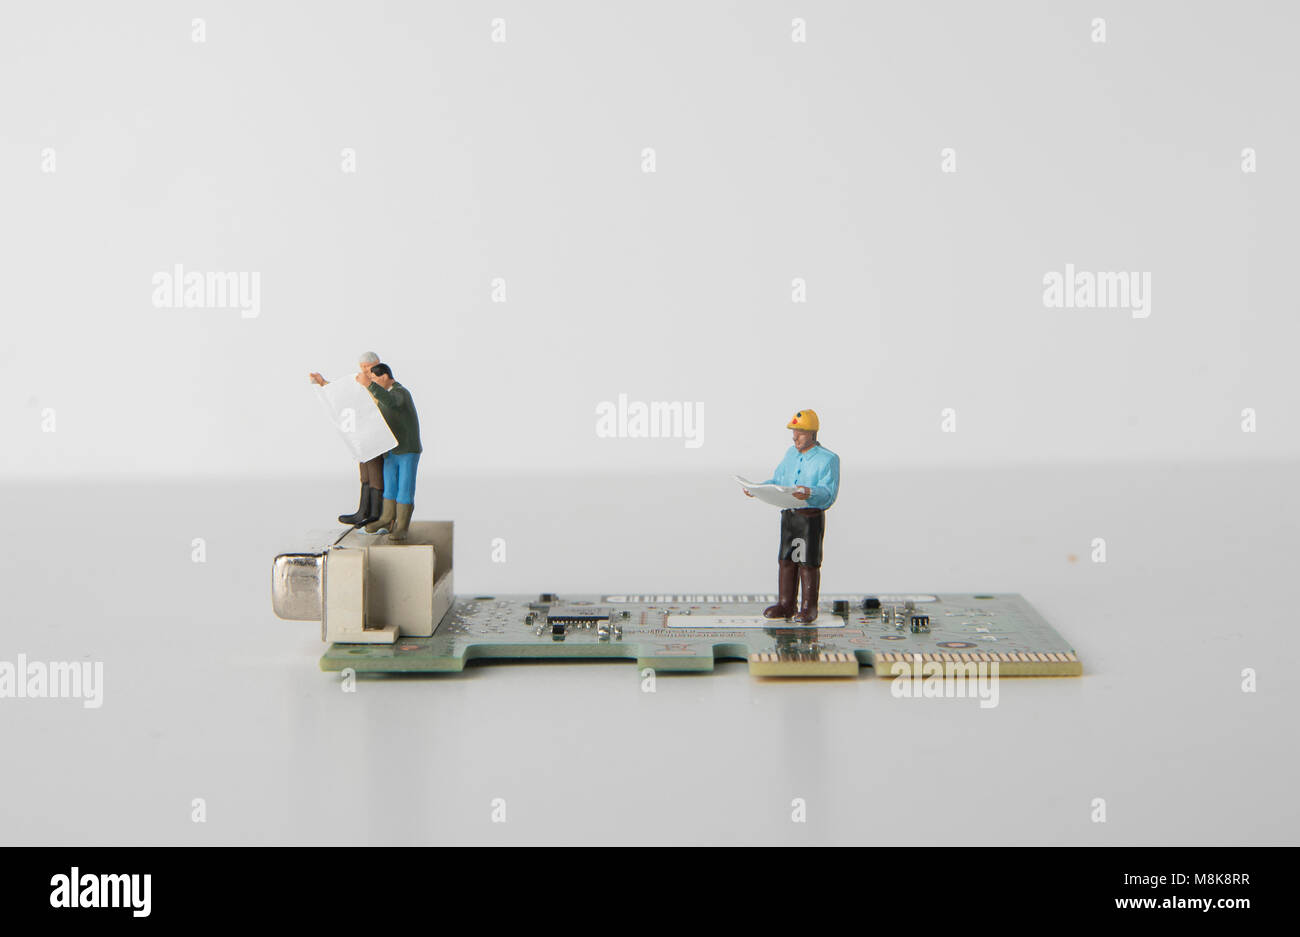 Miniature Figures imitating the working environment still life shots taken in a studio setup showing concepts of amintenance Stock Photo